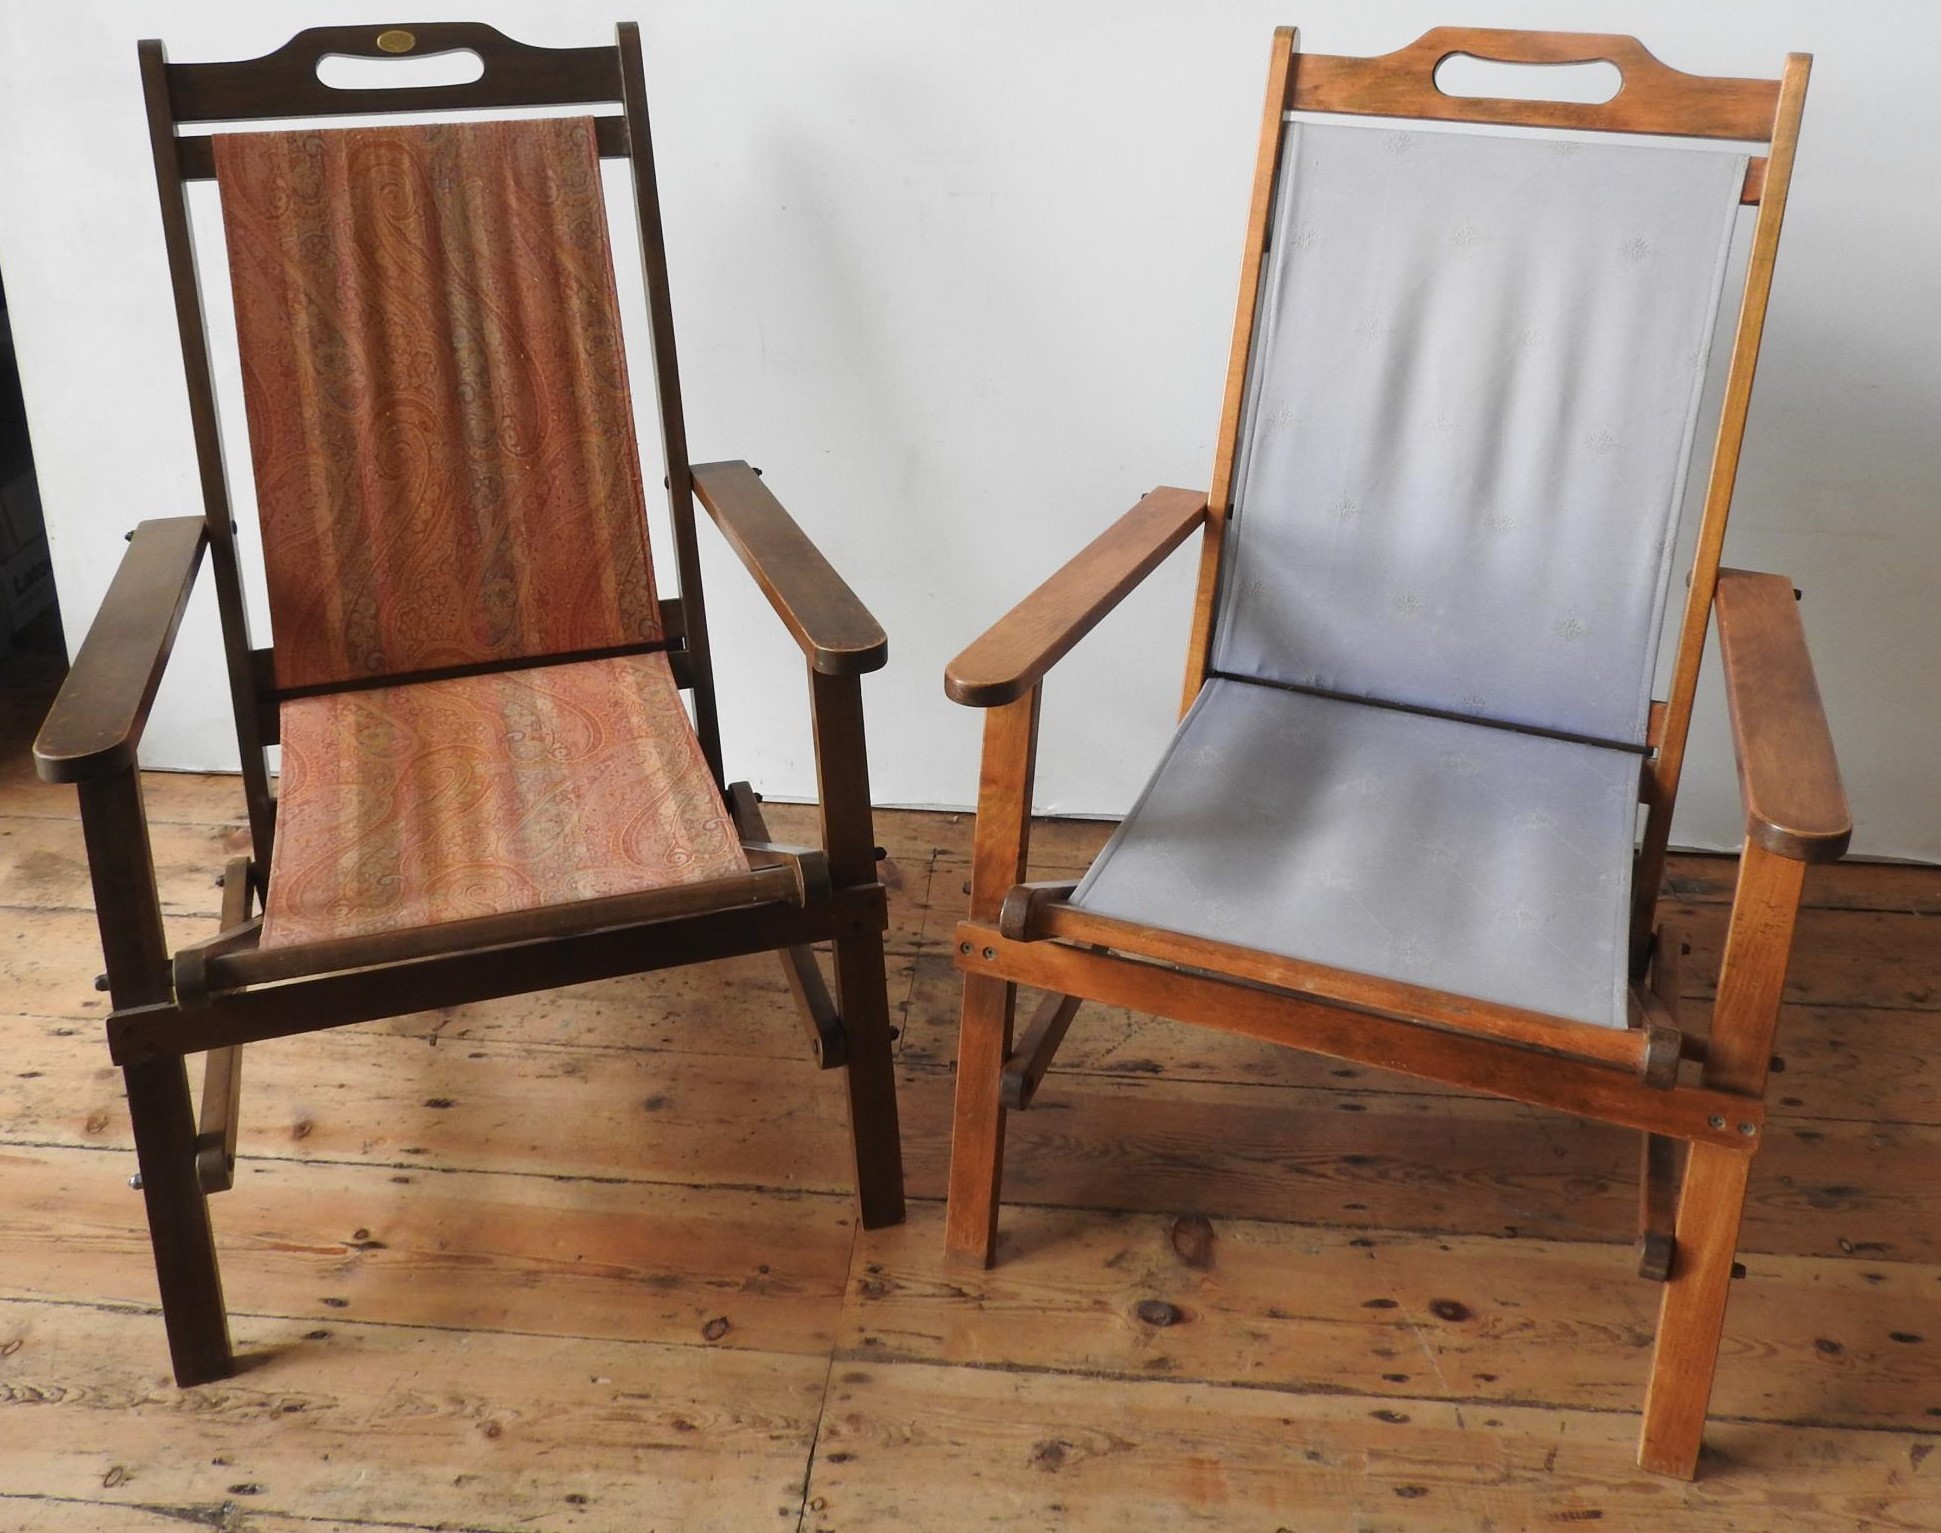 TWO FOLDING WOODEN PATIO CHAIRS WITH LOOSE CANVAS SEATS AND BACKS, ONE CHAIR BEARING A MULBERRY - Bild 3 aus 7